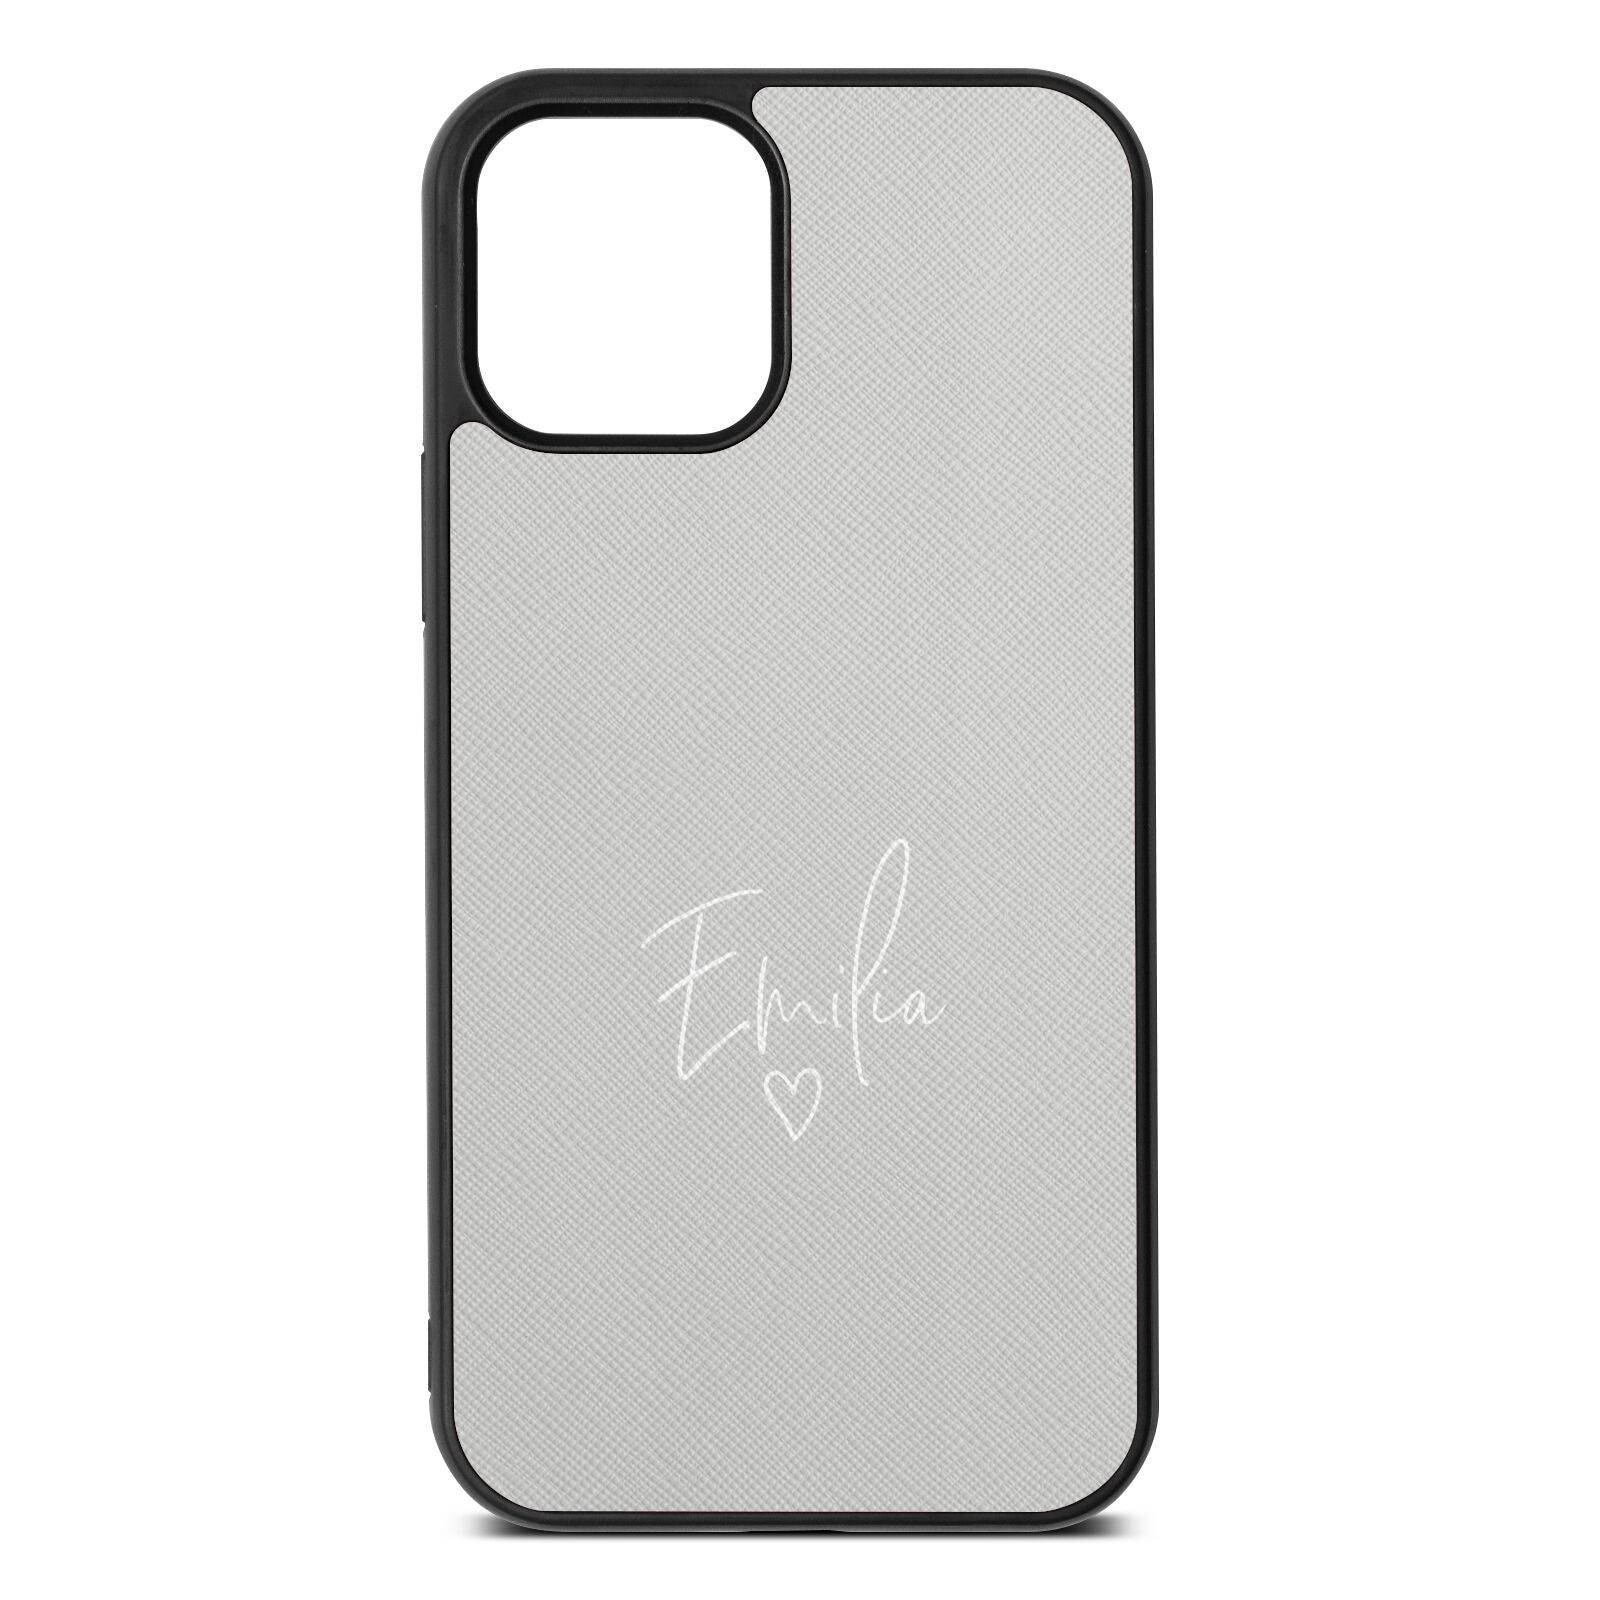 White Handwritten Name Transparent Silver Saffiano Leather iPhone 12 Case